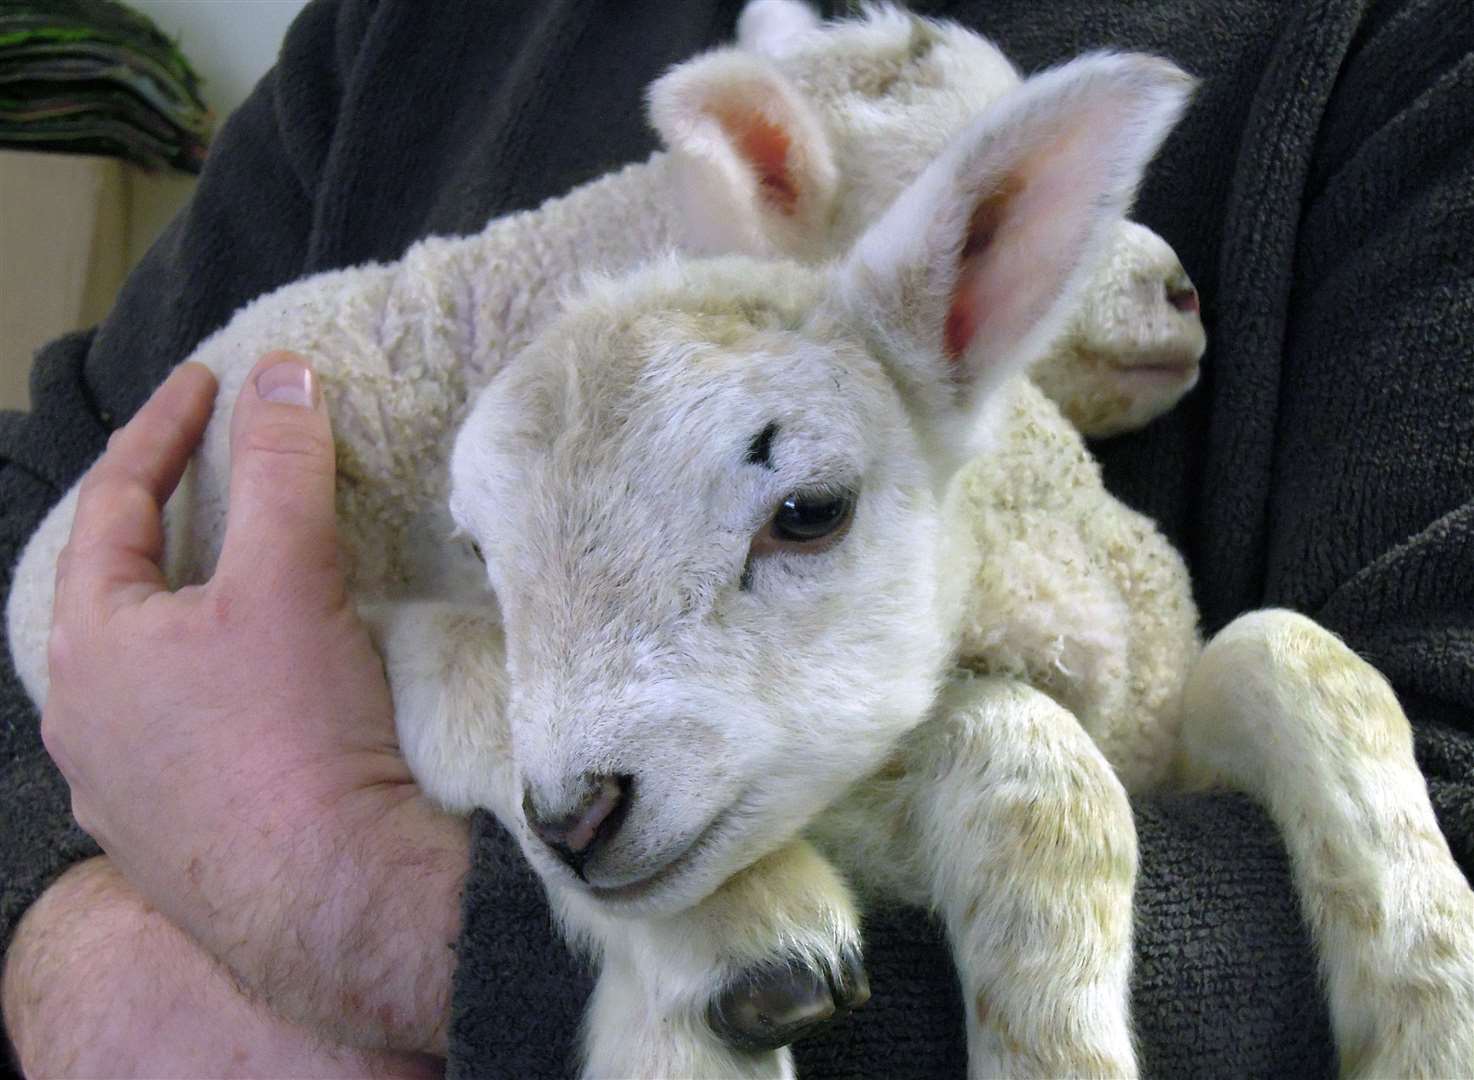 You can see little lambs at Brogdale this Easter weekend